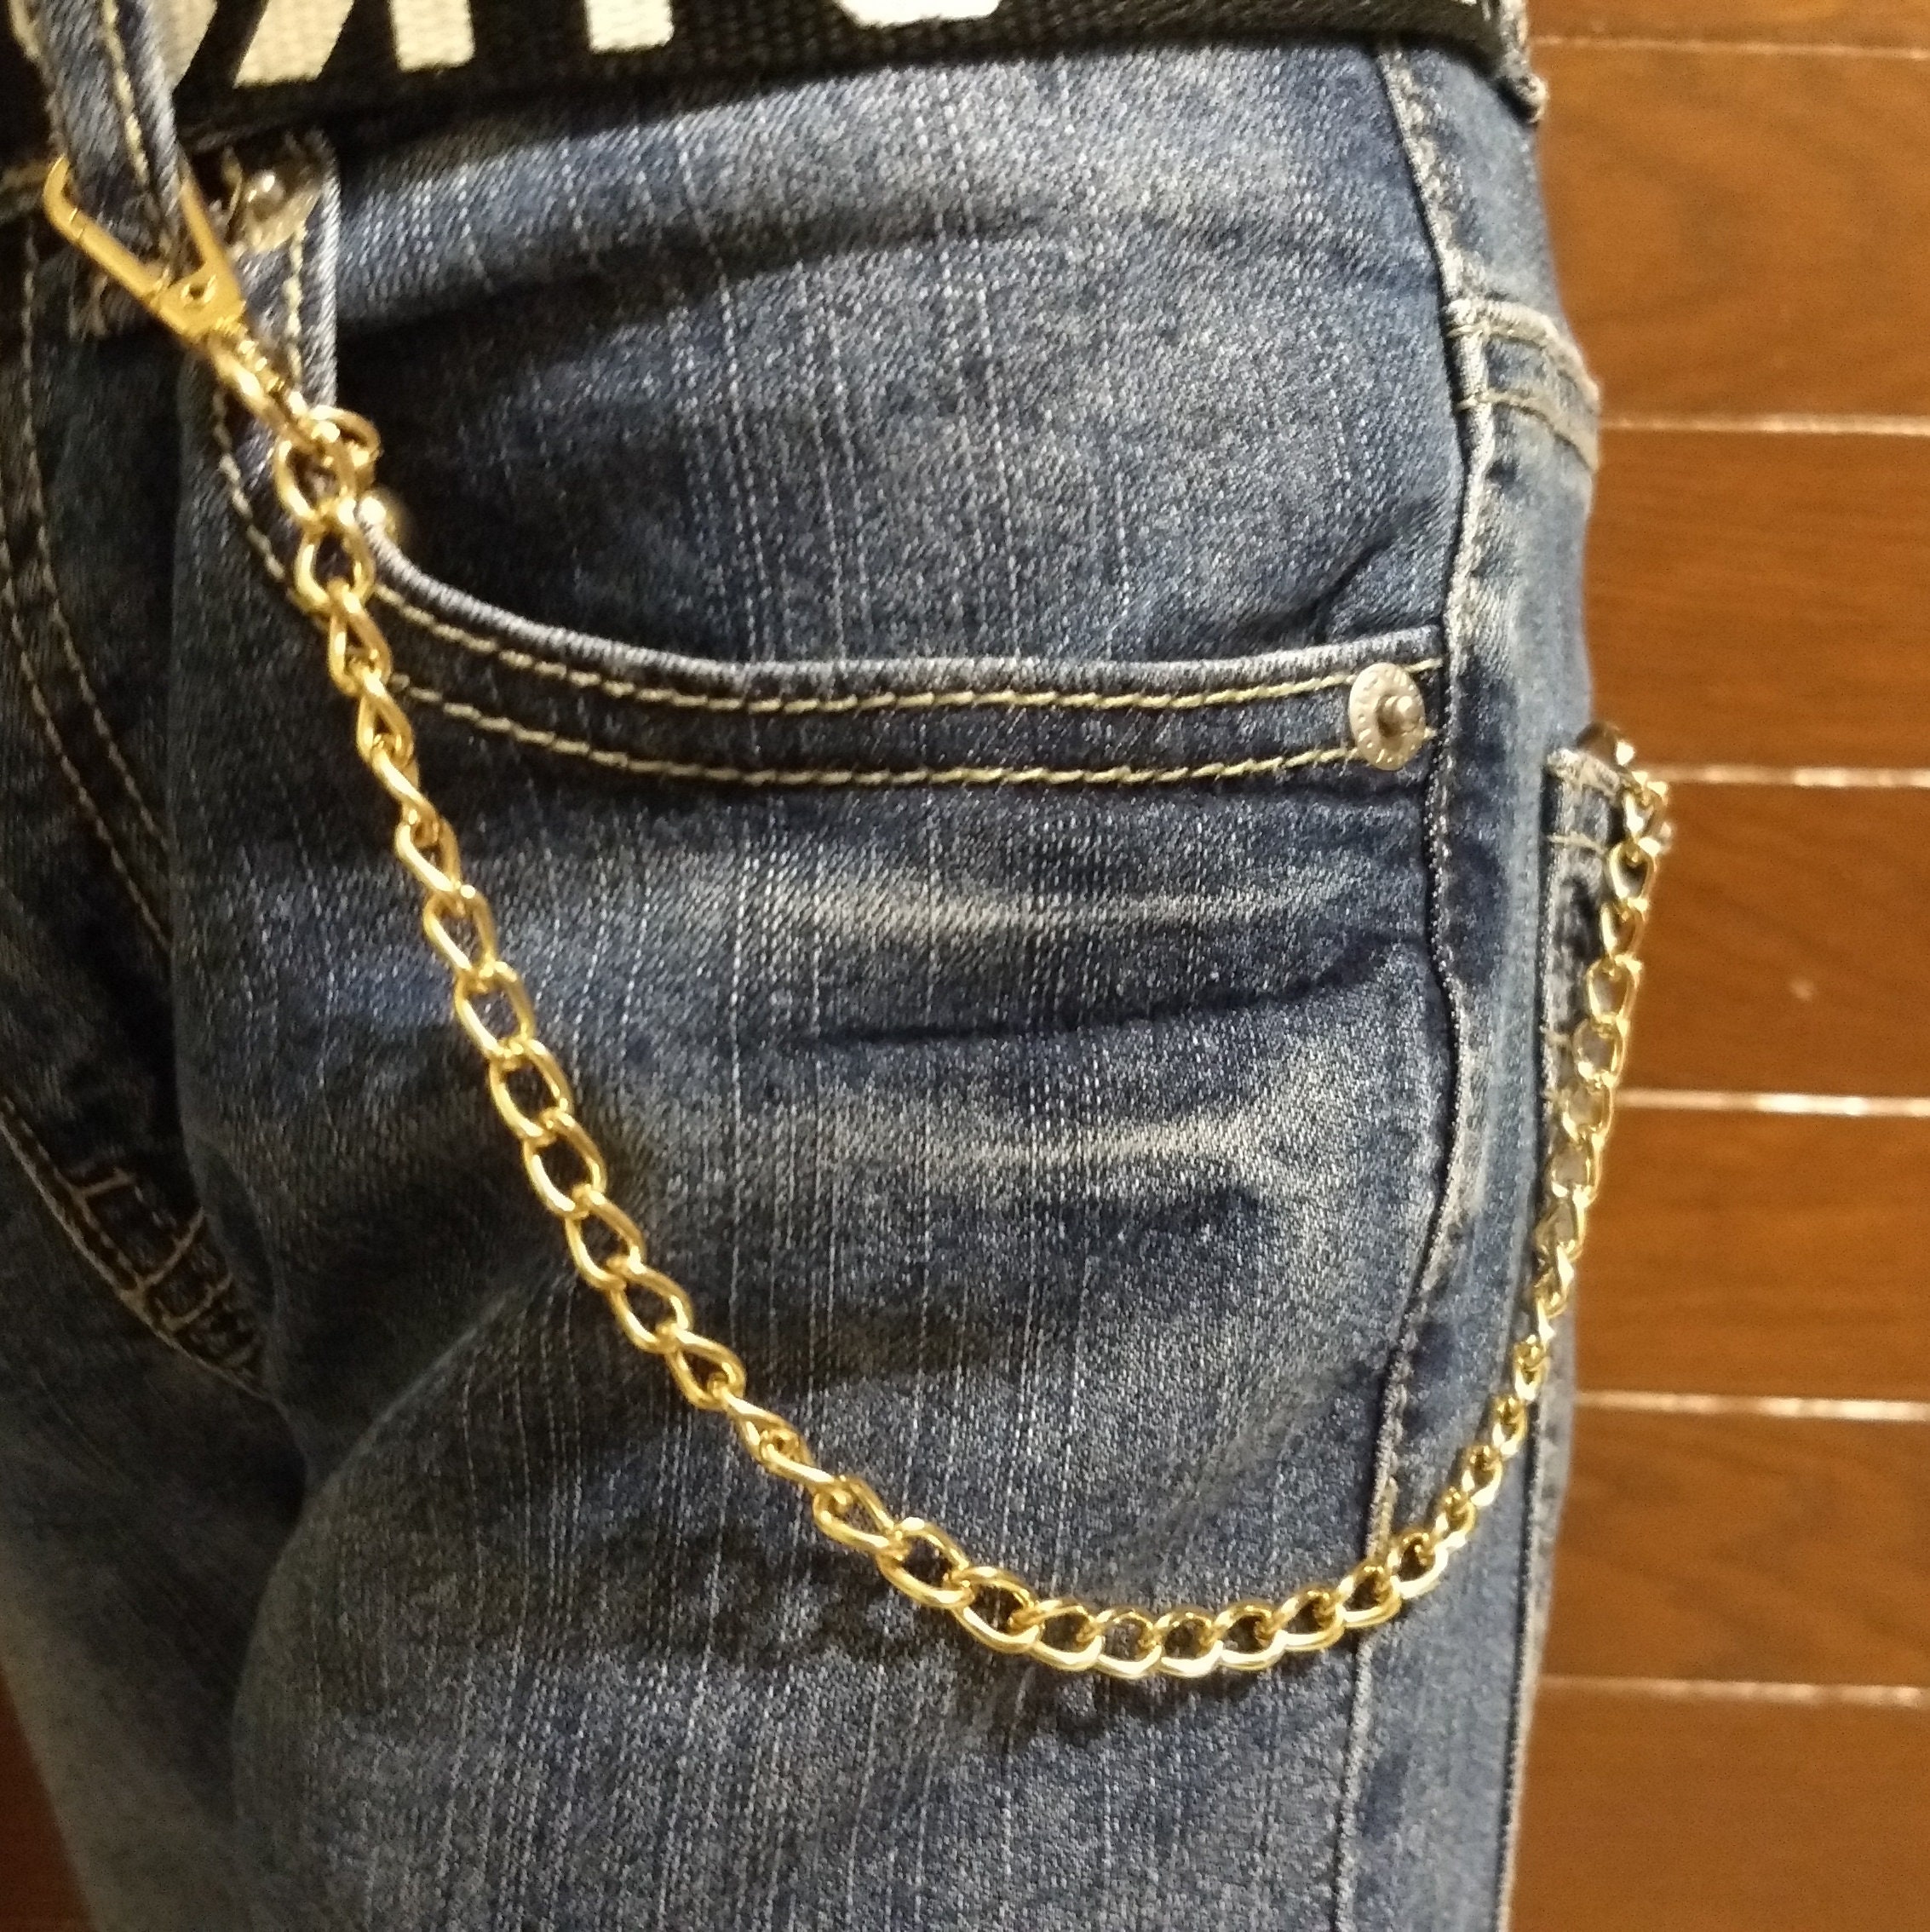 Coofit Pants Chain Fashion Casual Single Anti-theft Metal Wallet Chain  Jeans Chain For Men Women Walmart Canada | Metal Wallet Chain Keychains For  Men Women Waist Jeans Belt Chains Jewelry Accessories